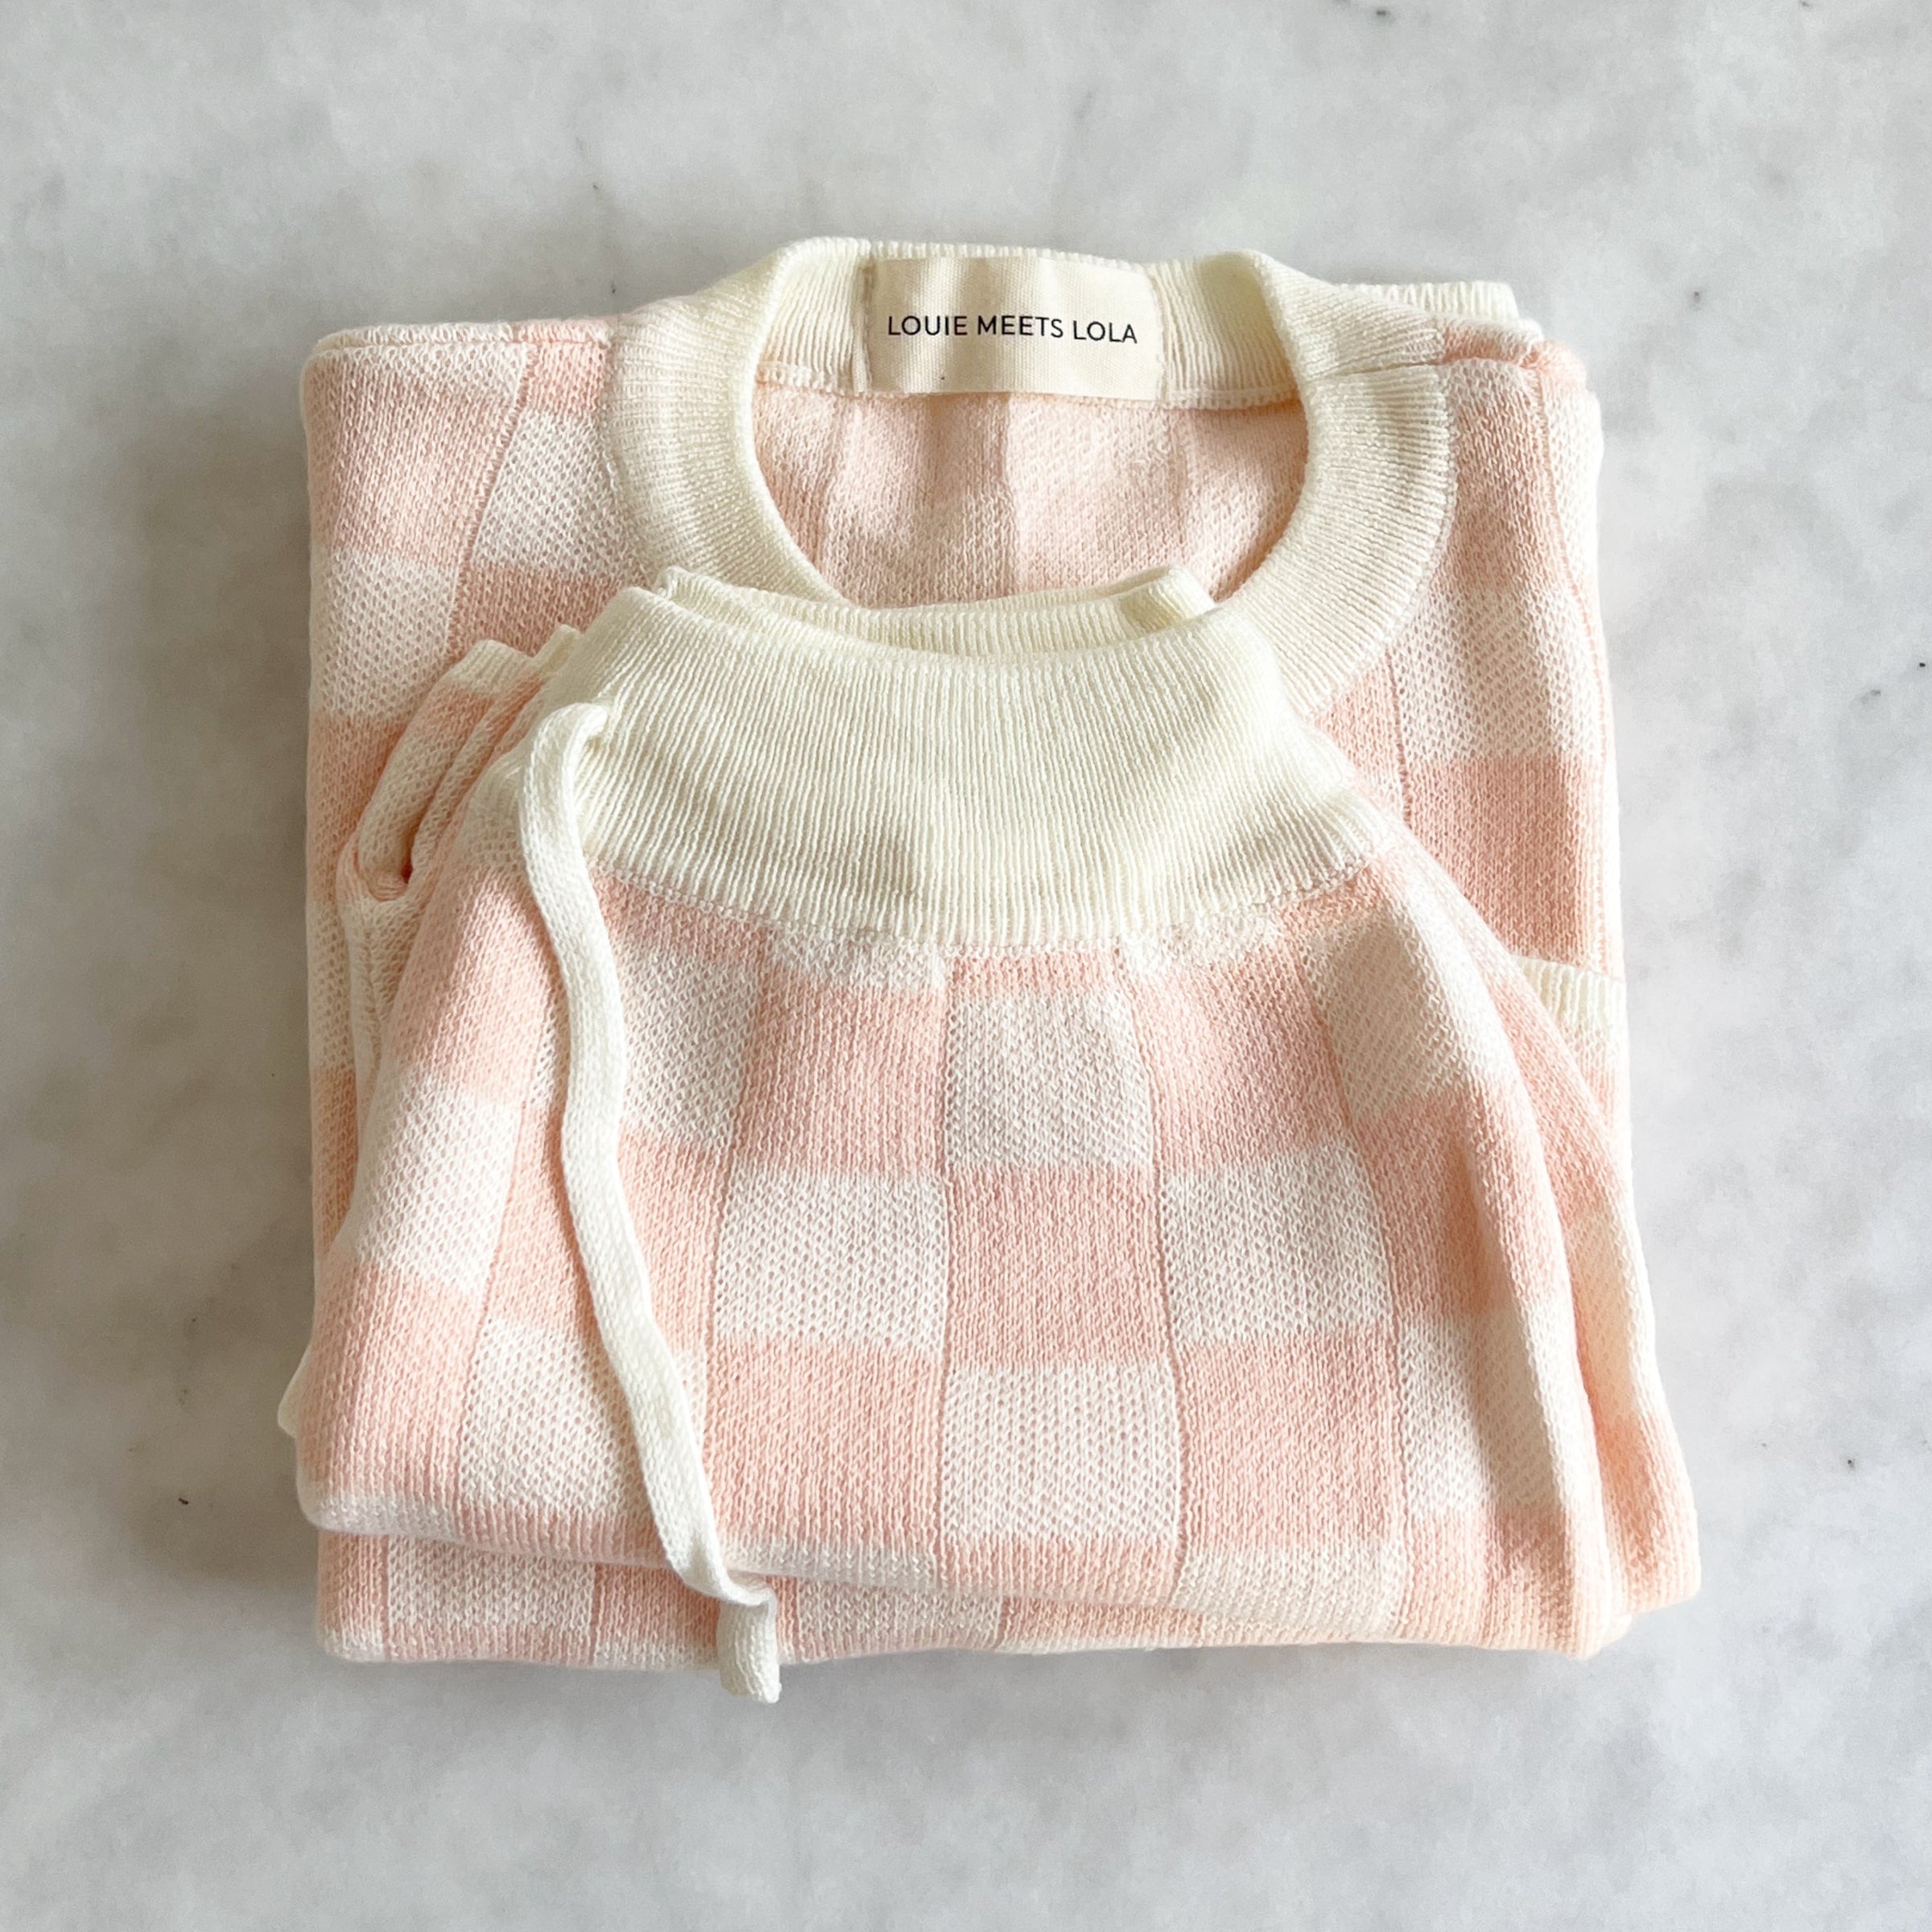 Gingham Lounge Top - Strawberry - Baby Tops at Louie Meets Lola